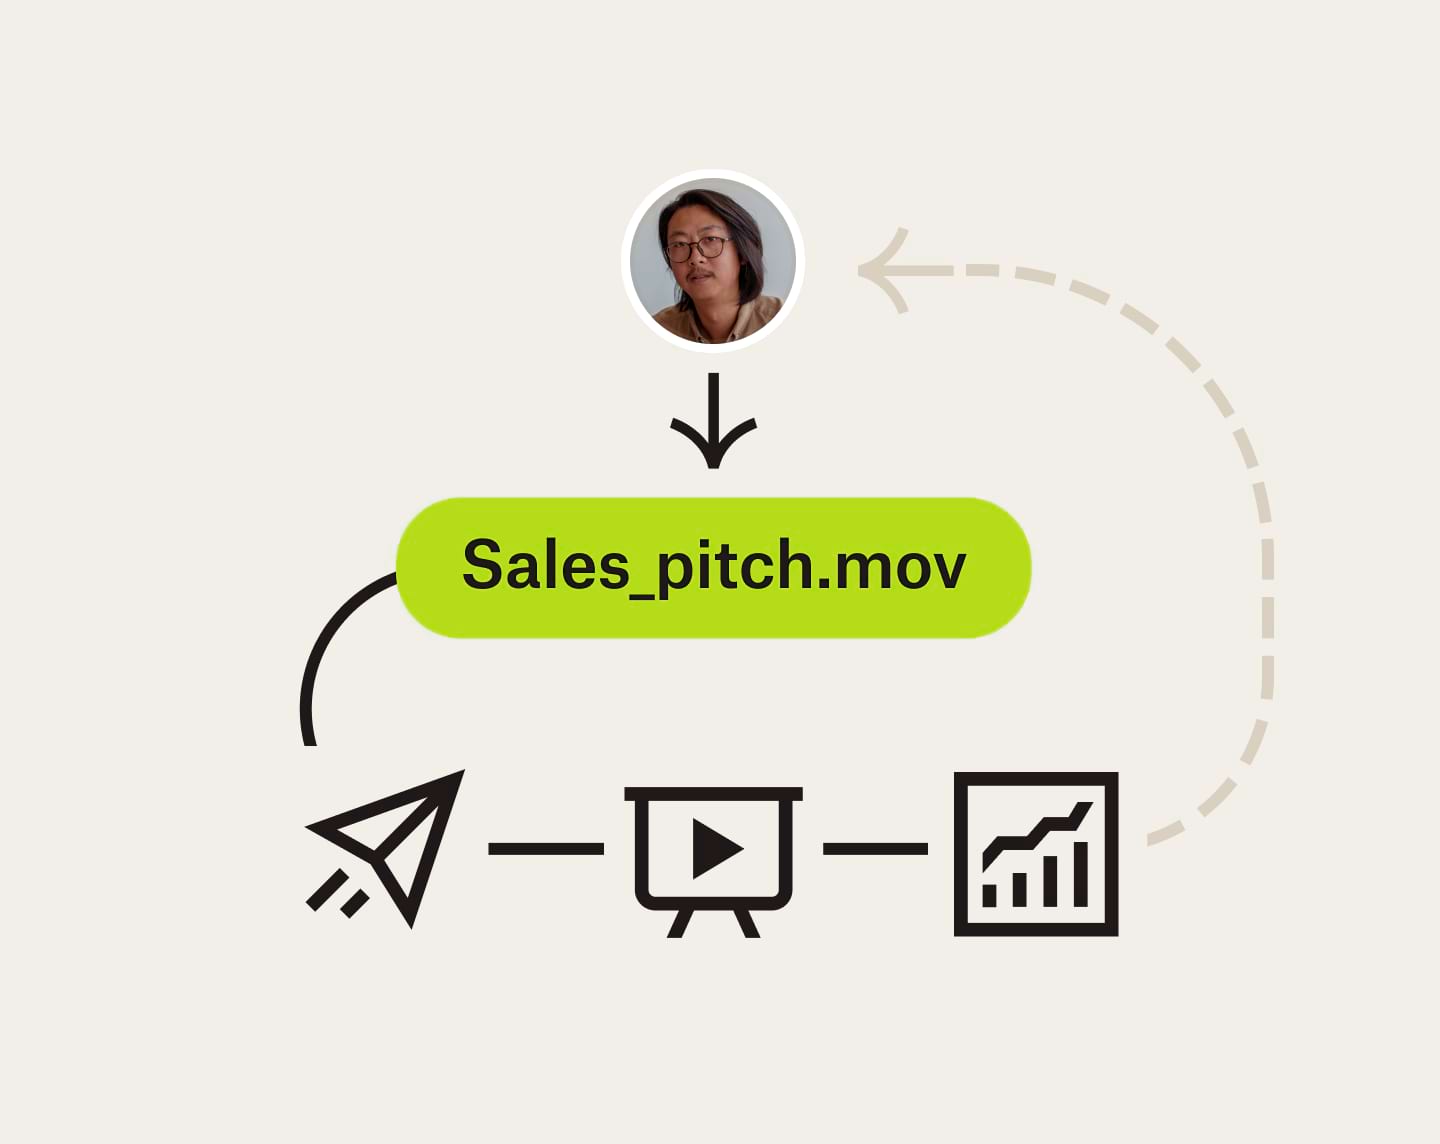 A flowchart that shows how a sales pitch video can be sent, viewed, and help with business growth.